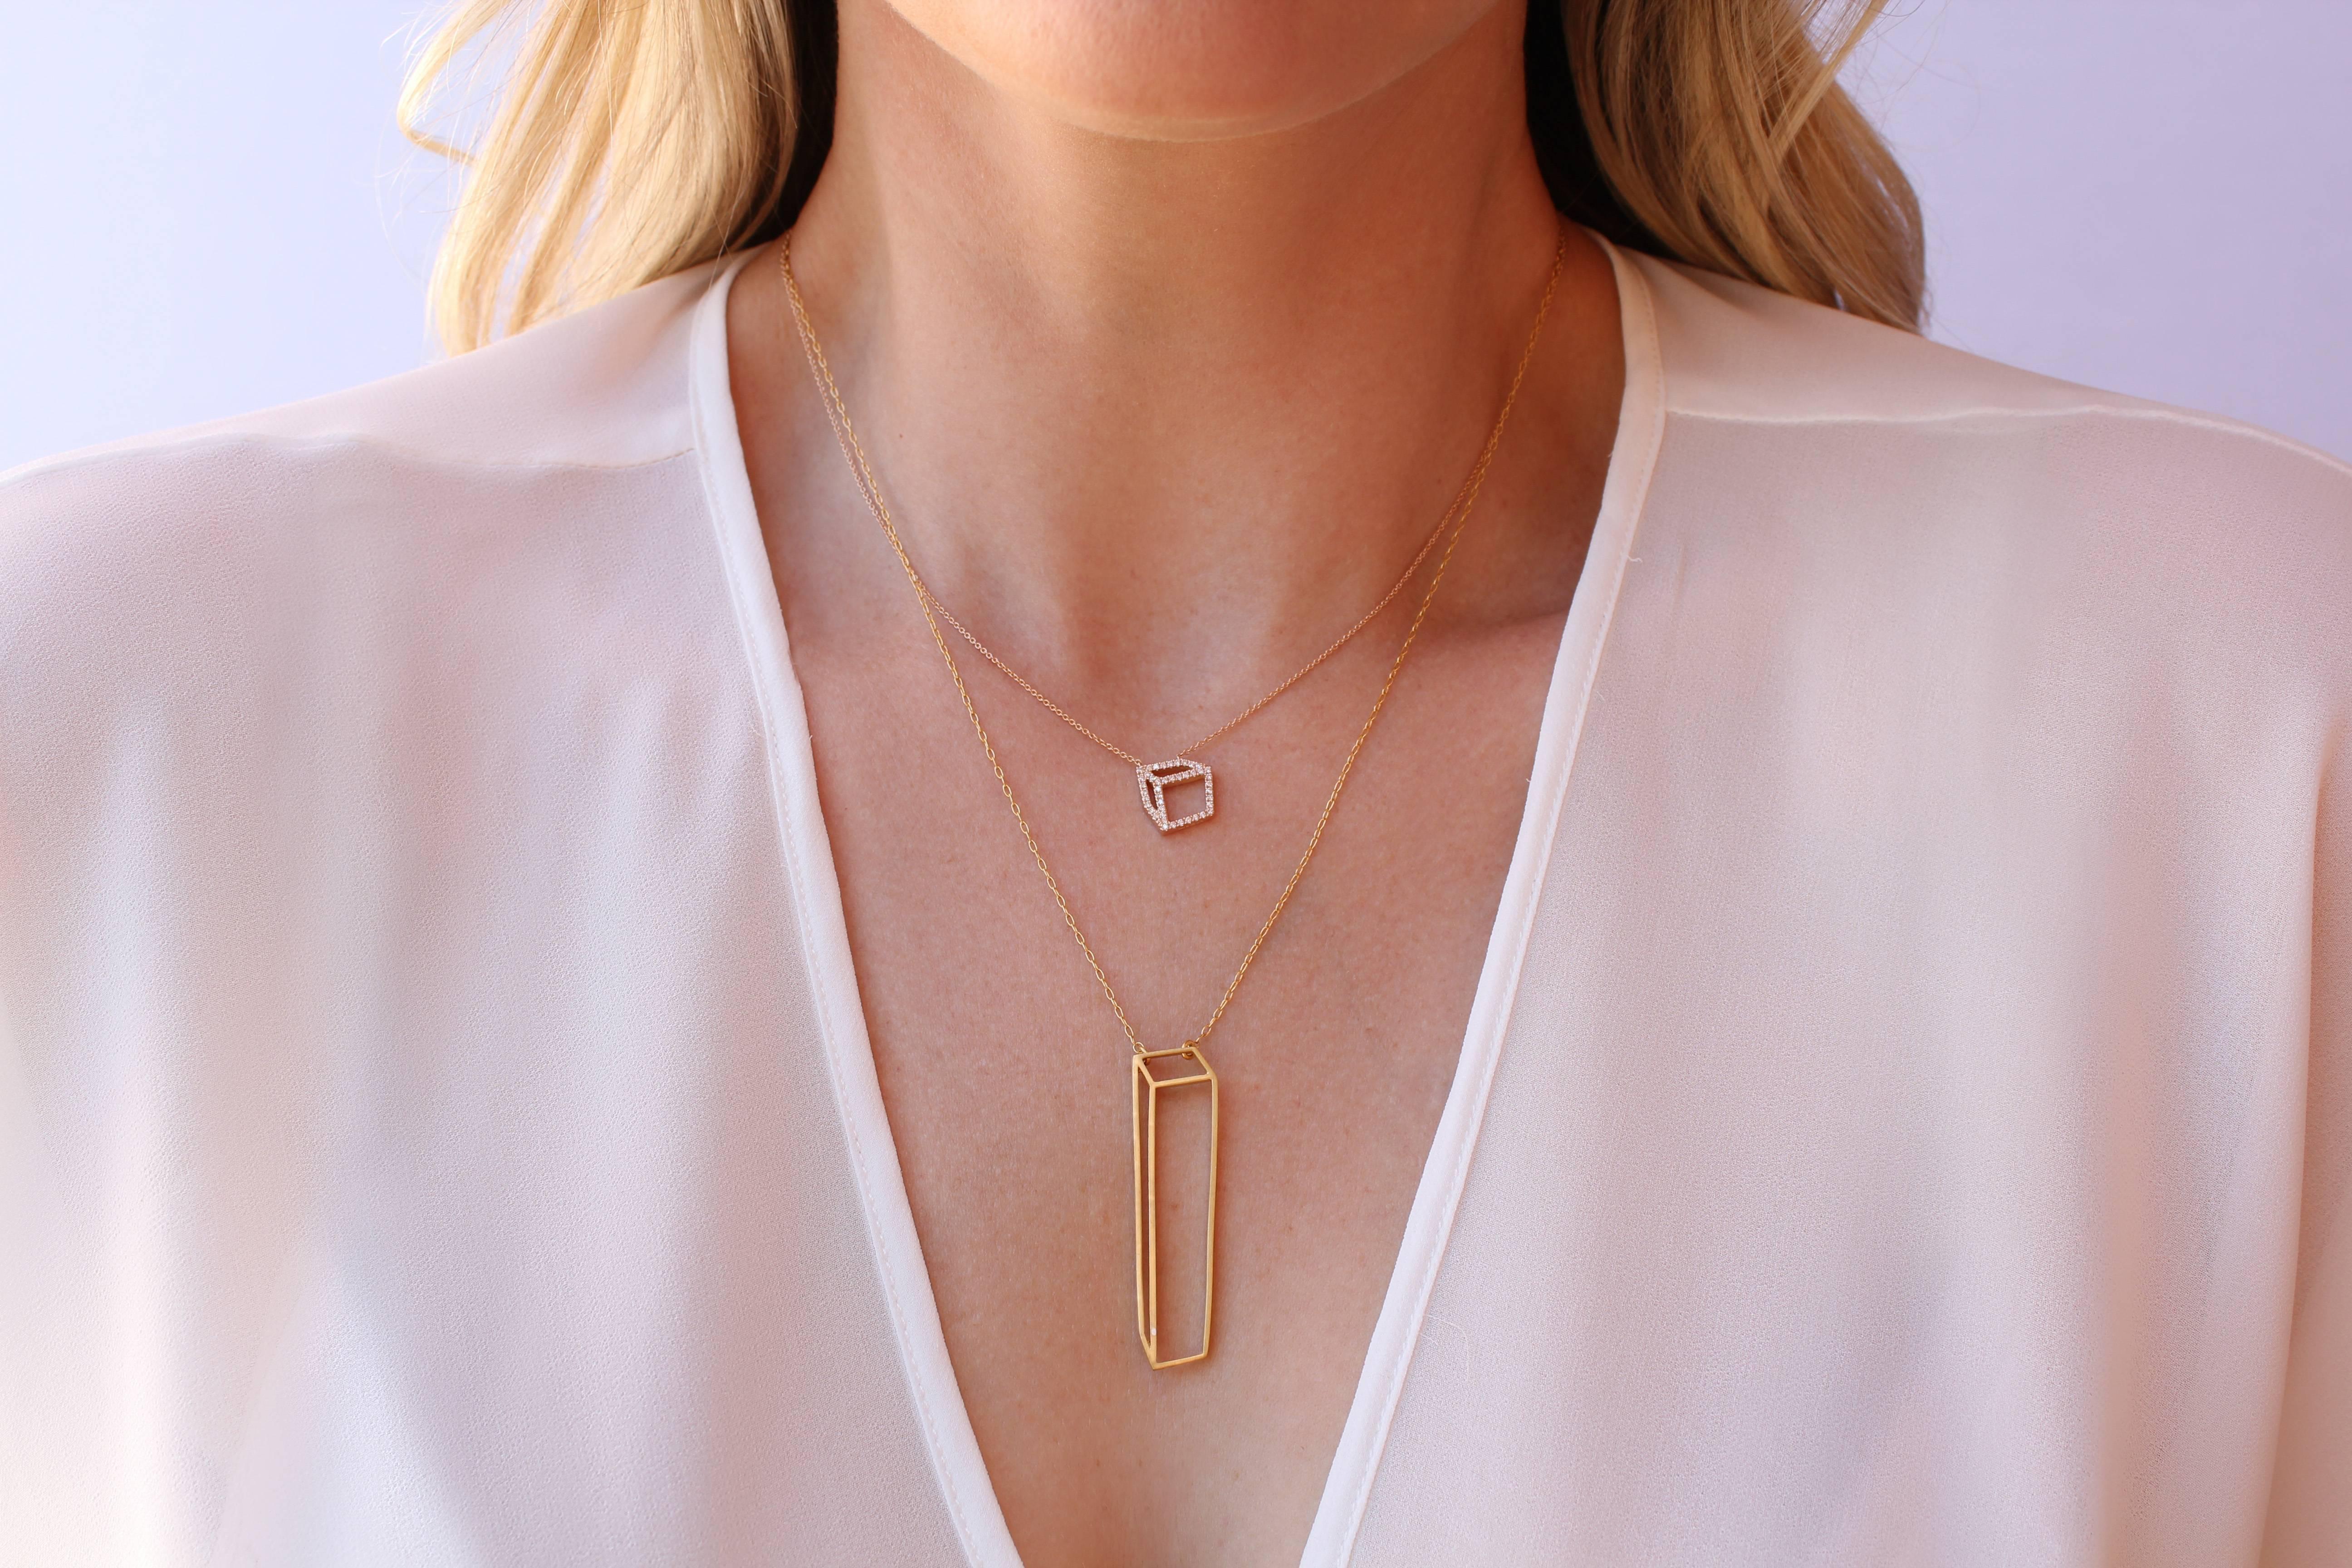 Small Cube Necklace handmade in London in high-polished 18k rose gold with 0.22 carats of round brilliant-cut white diamonds (F/G, vs1) on an 18k rose gold chain, 17 inches long. The pendant appears multi-dimensional but actually lays flat on the